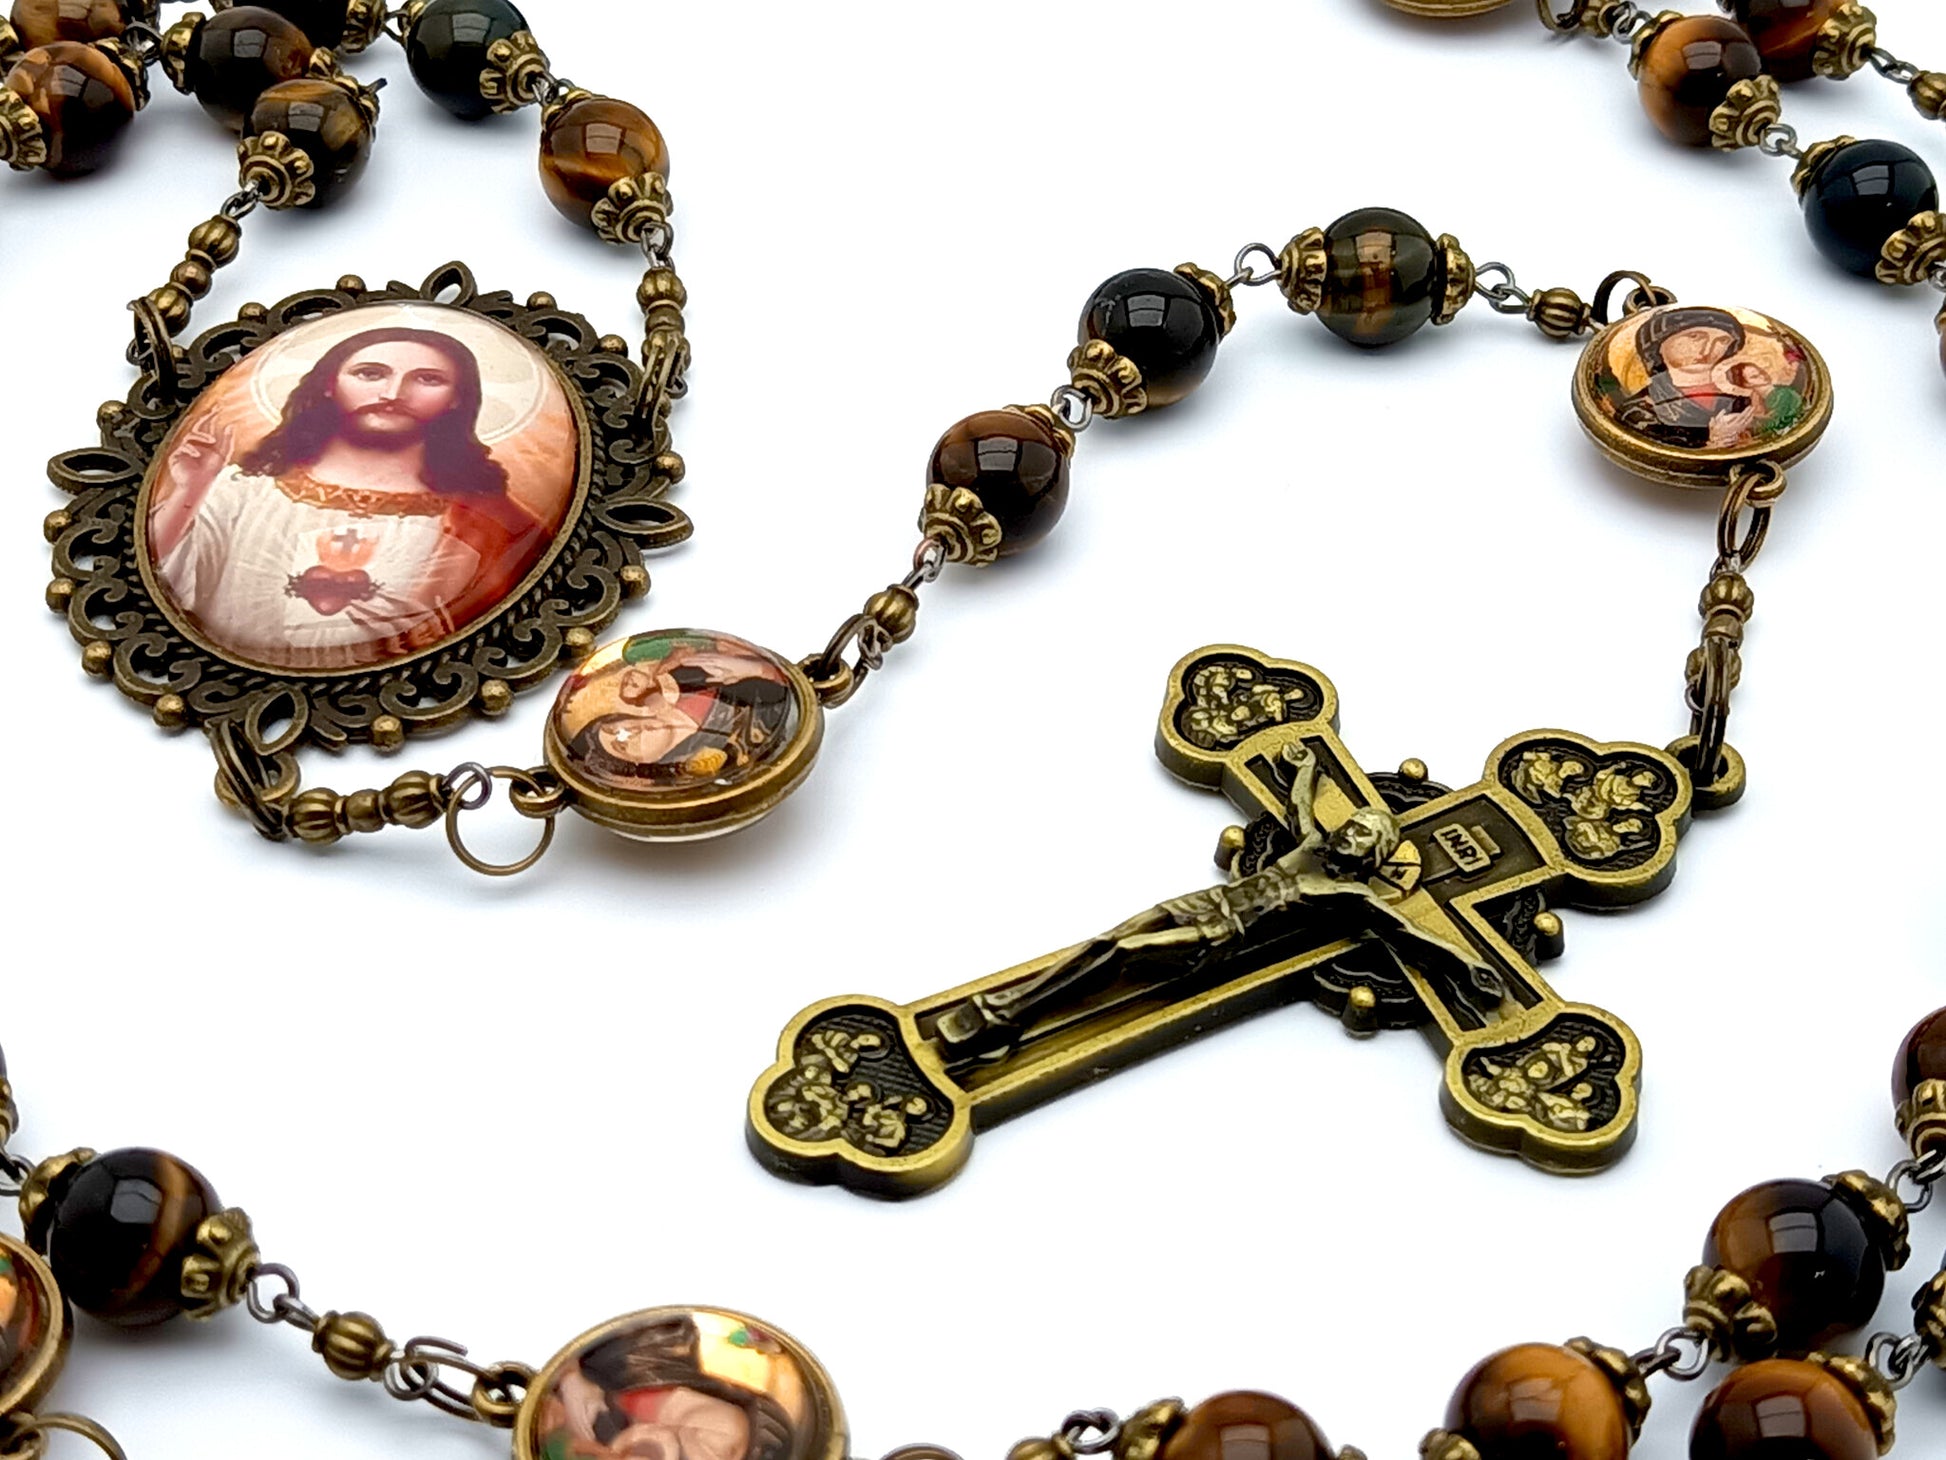 Sacred Heart unique rosary beads with tigers eye gemstone beads and Our Lady of Perpetual Help picture pater beads, bronze twelve apostles crucifix and picture centre medal.